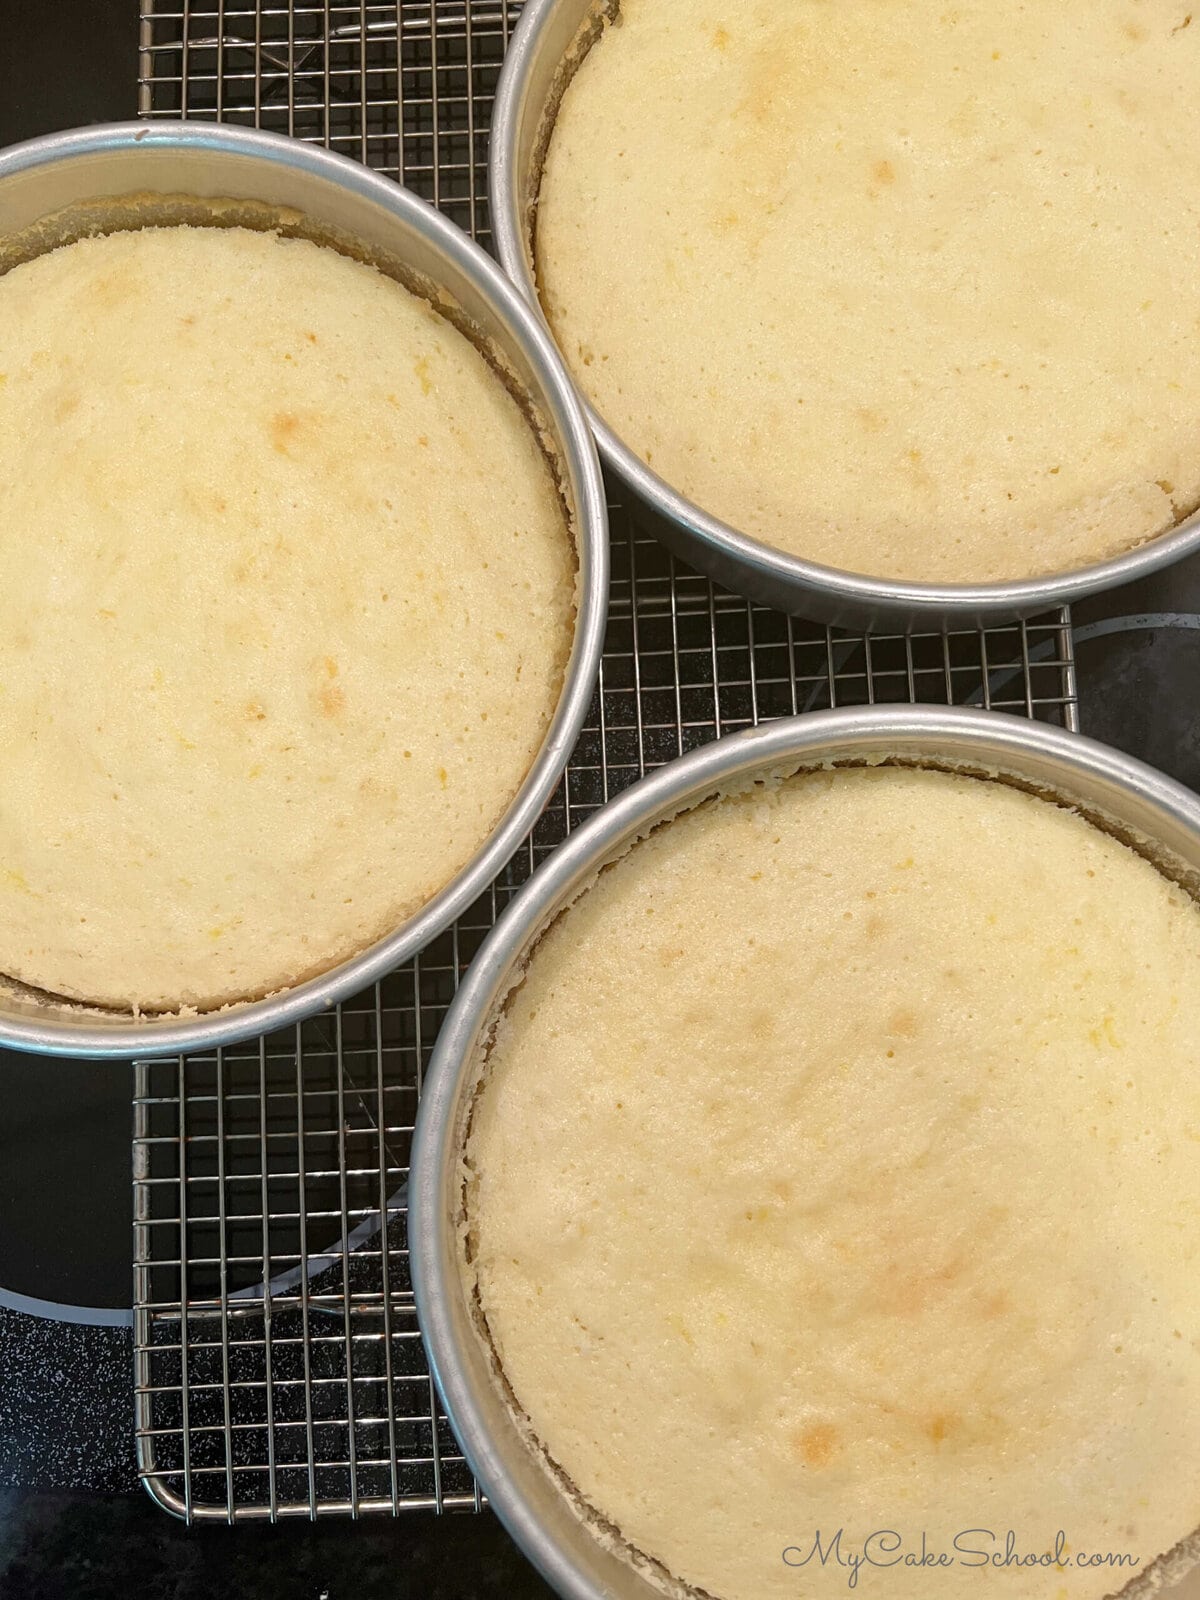 Lemon almond cake layers in cake pans, cooling on wire rack.